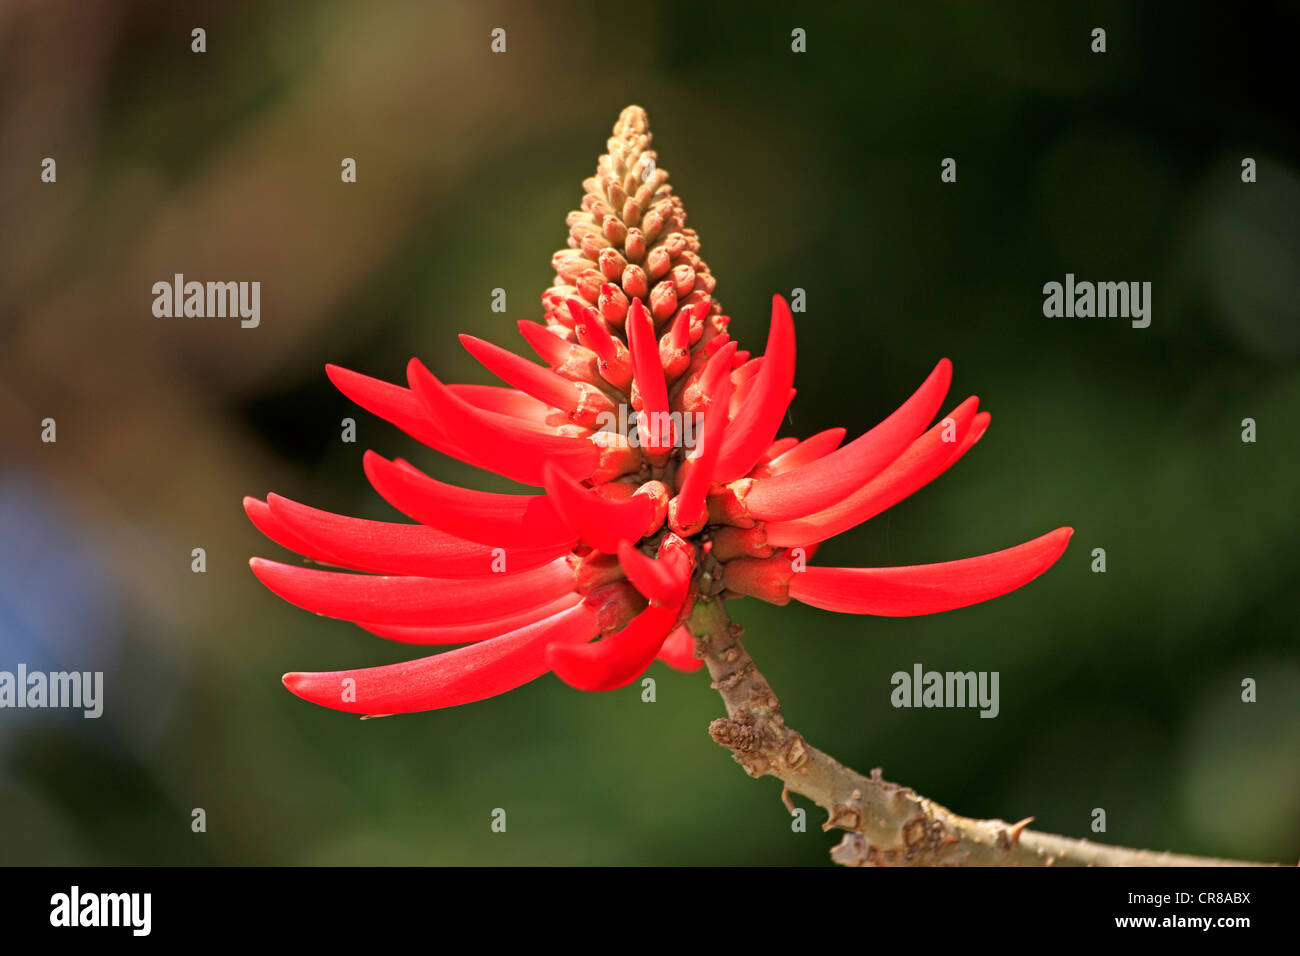 Flame Coral Tree or Naked Coral Tree (Erythrina coralloides), flower, California, USA, America Stock Photo